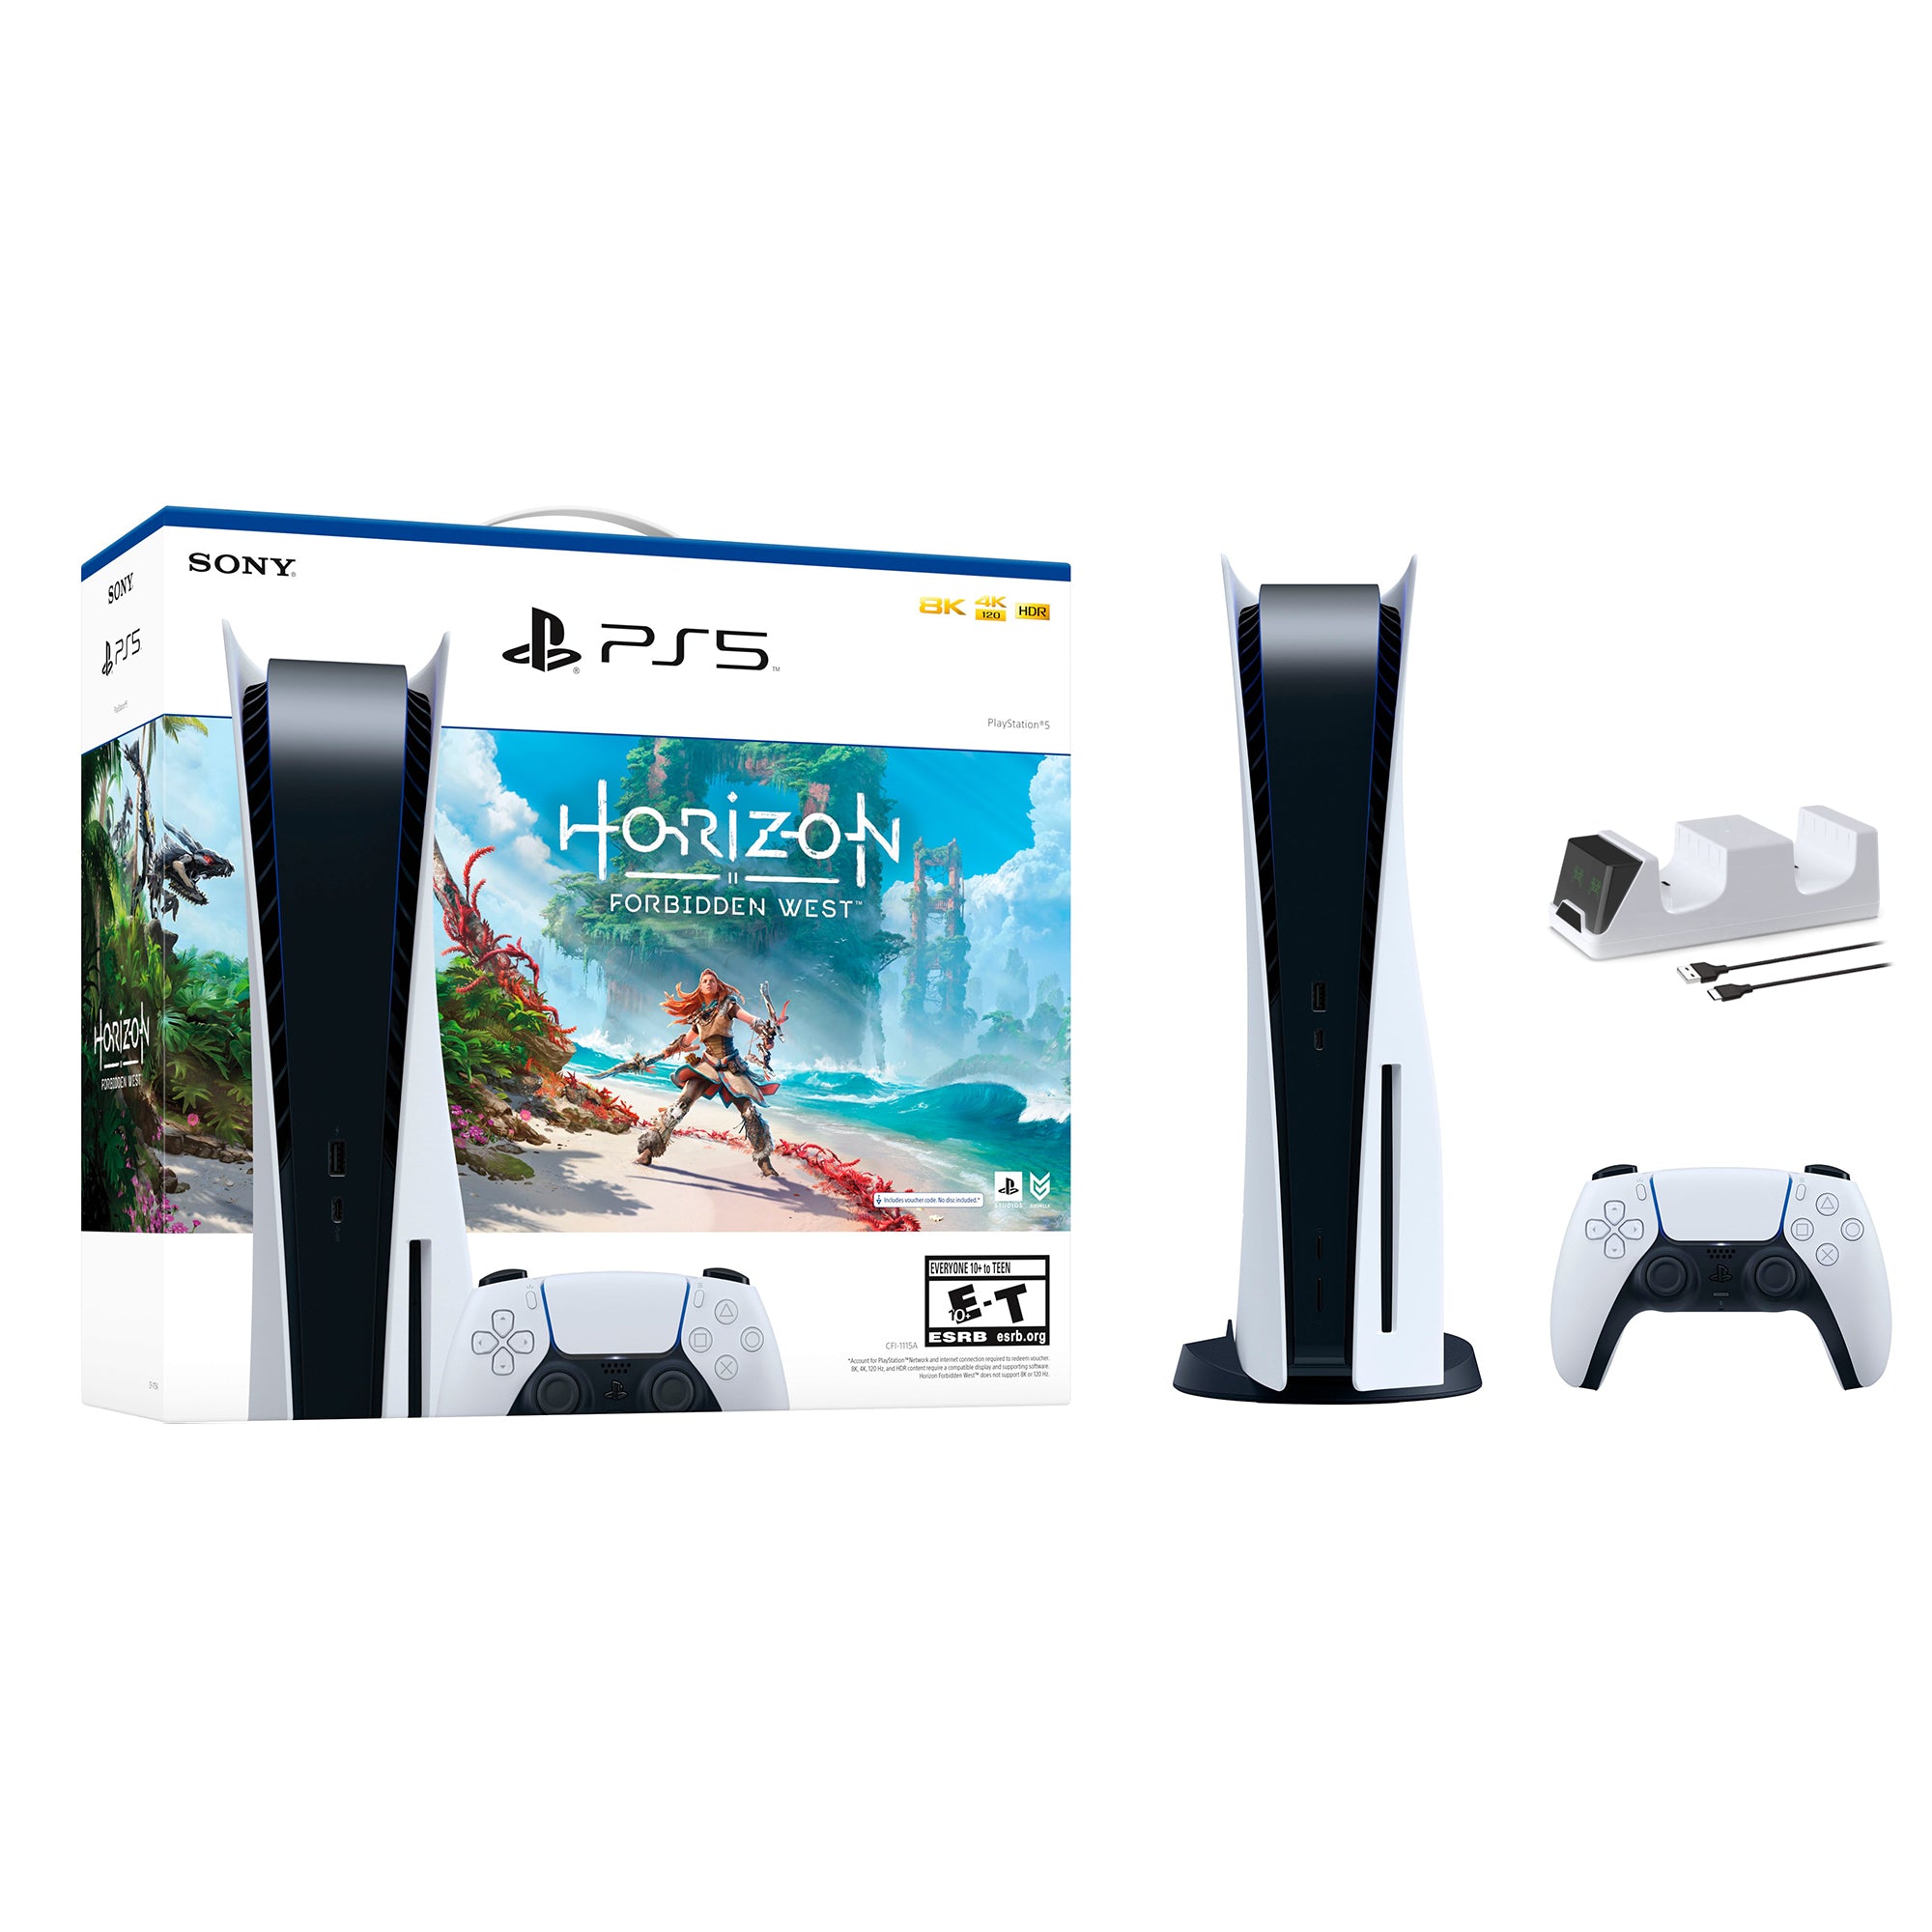 PlayStation 5 Disc Edition Horizon Forbidden West Bundle and Mytrix Controller Charger - White, PS5 825GB Gaming Console